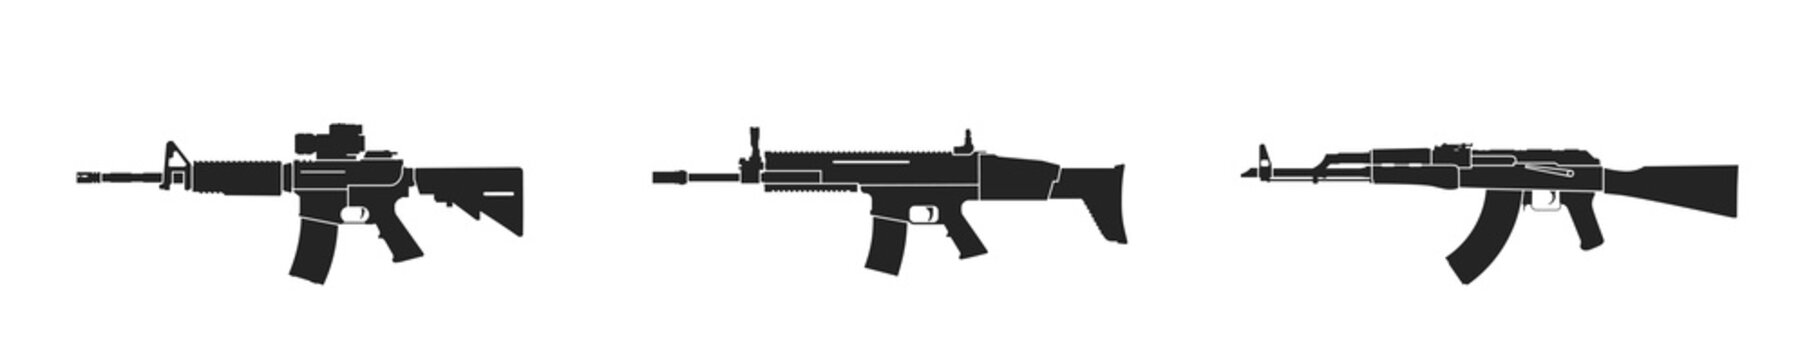 m4 carbine, fn herstal scar and kalashnikov assault rifles. weapon and army symbol. vector image for military web design